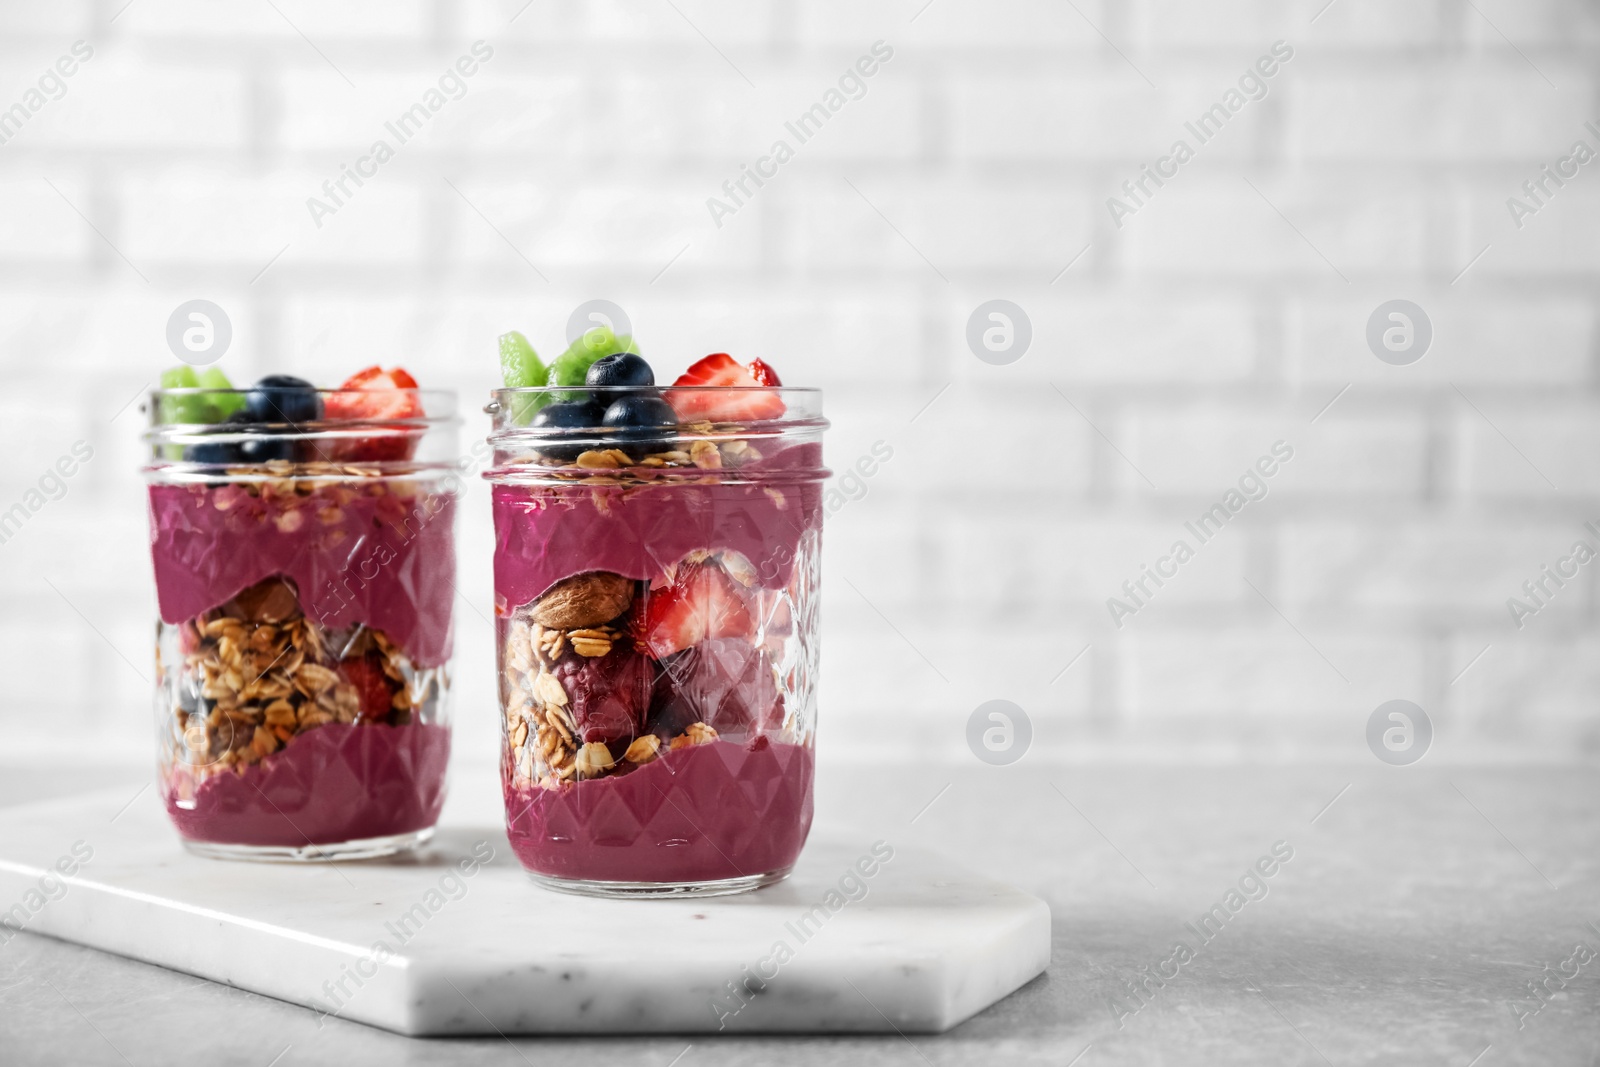 Photo of Delicious acai dessert with granola and berries in jars on table against white brick wall. Space for text